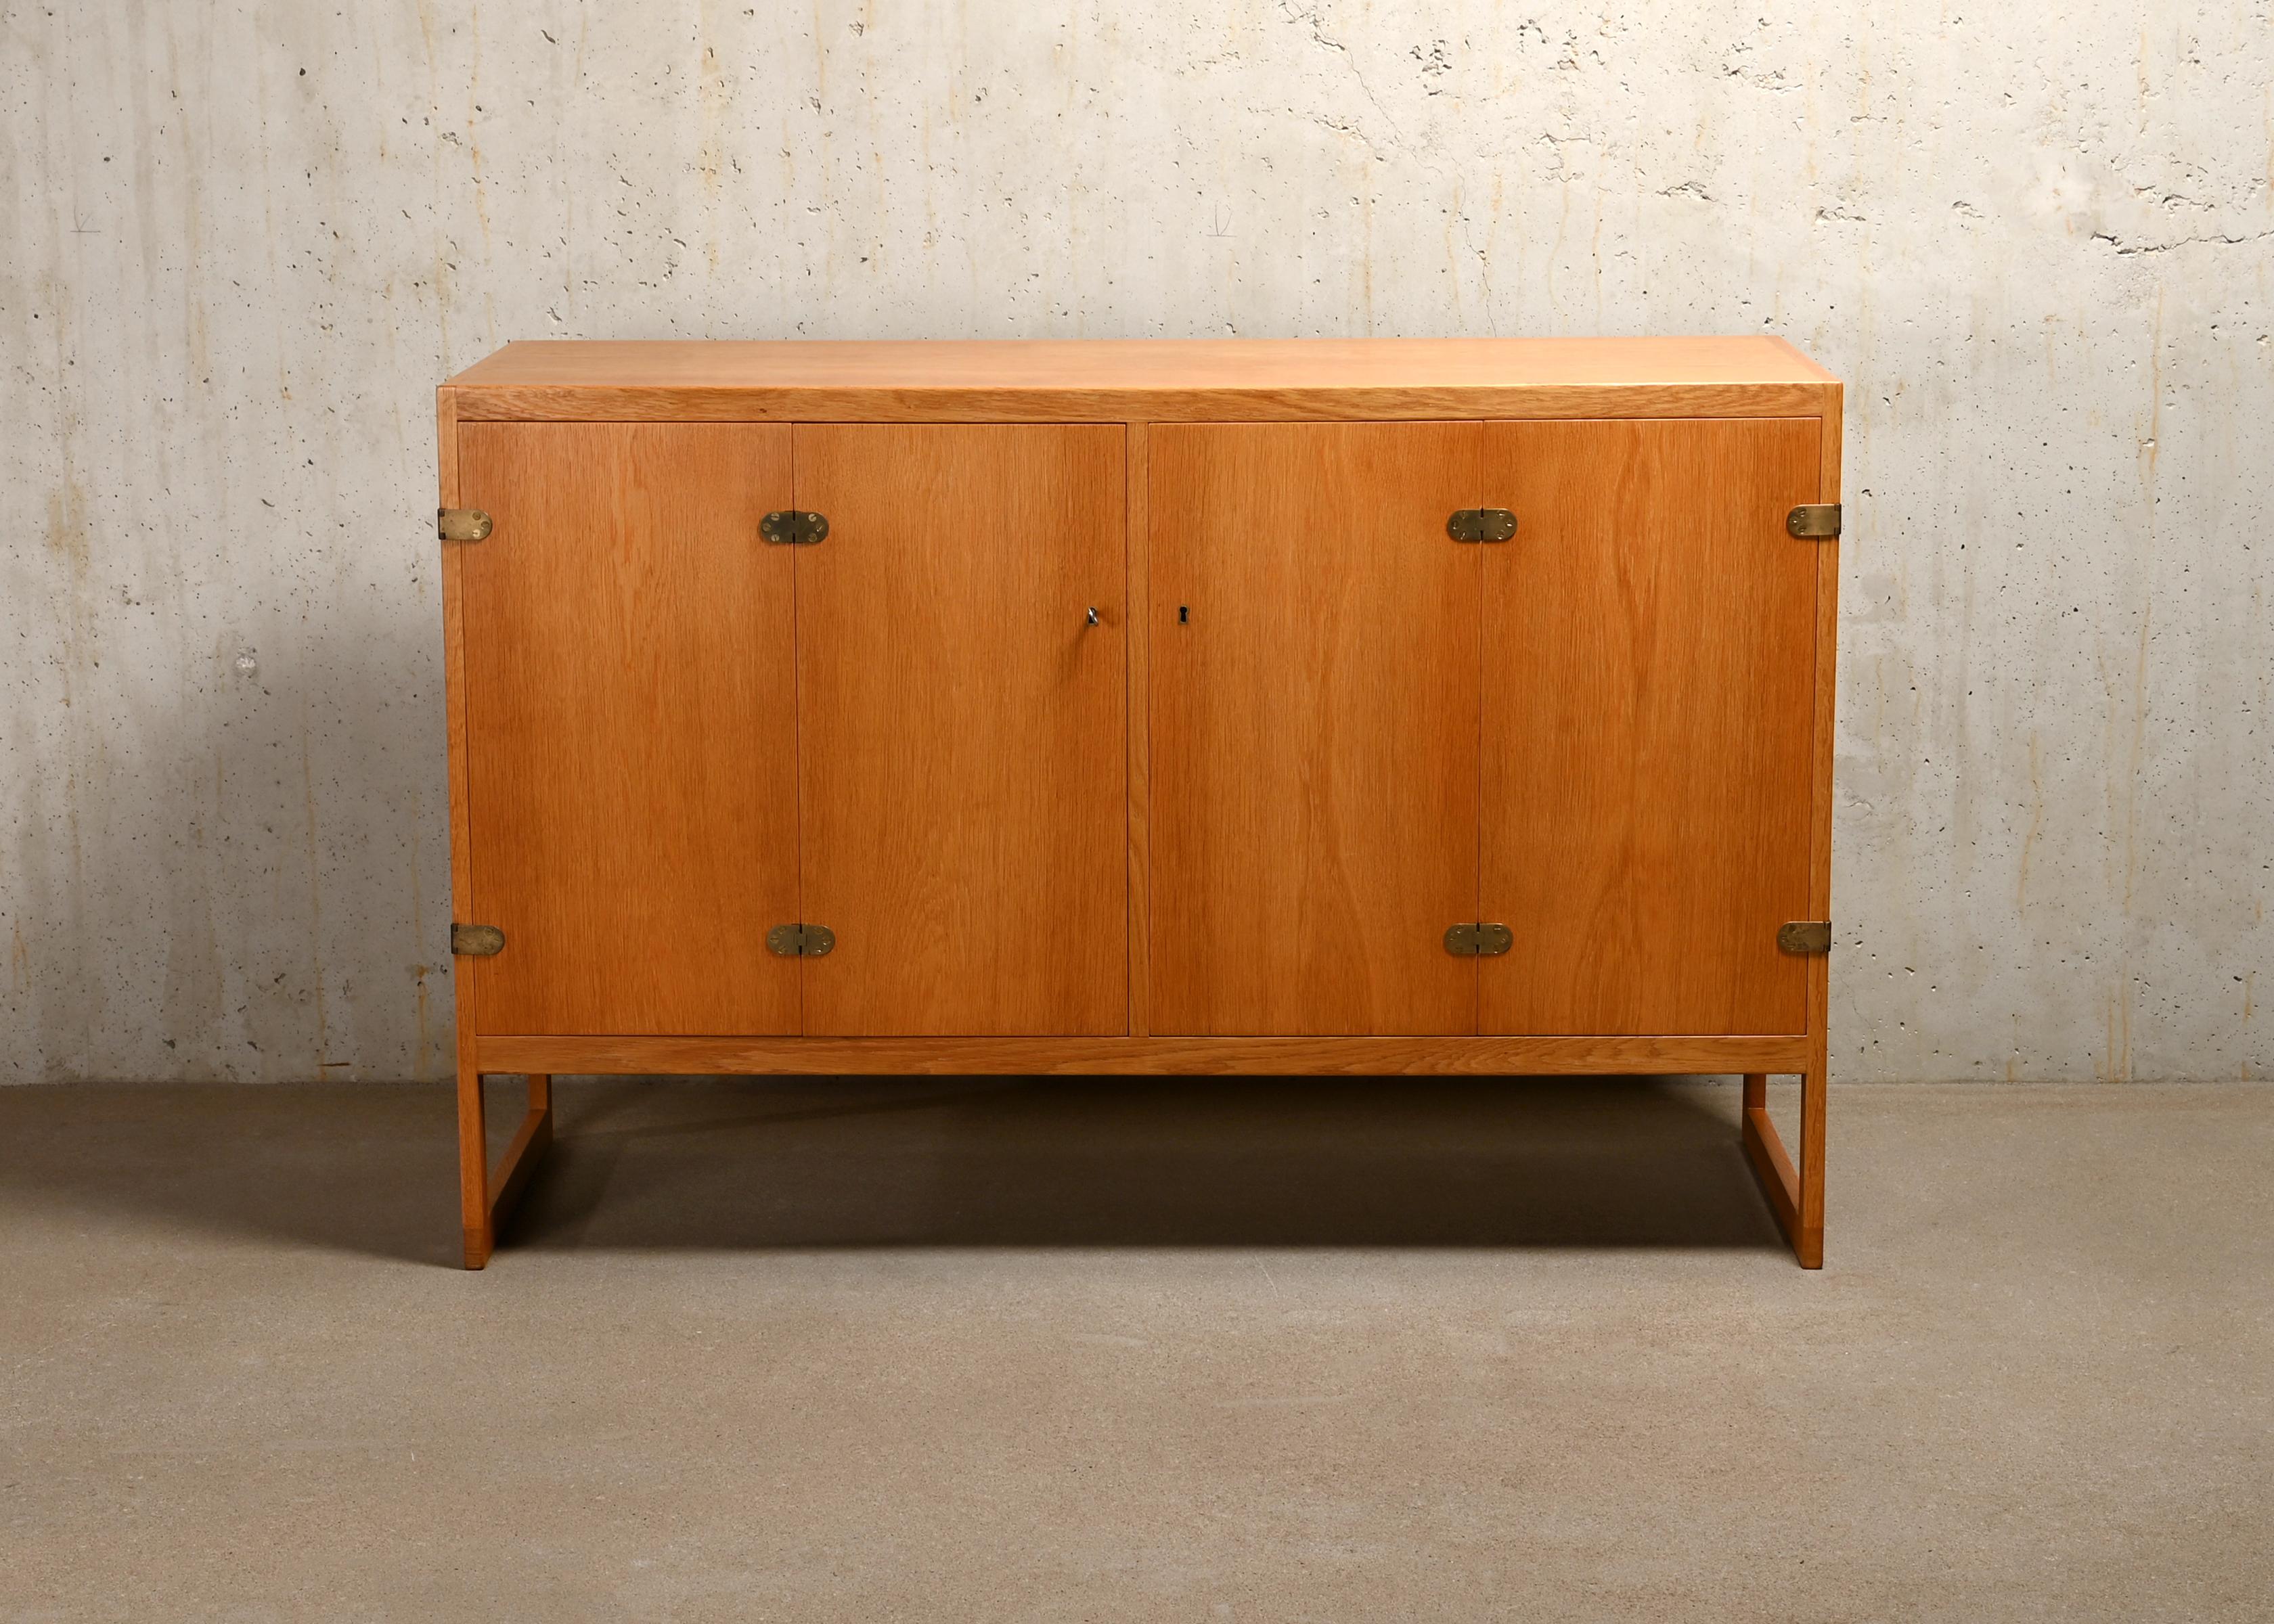 Beautiful sideboard model BM57 designed by Børge Mogensen in 1957 for P. Lauritsen & Søn. Oak wood with two bi-fold doors and brass hinges. One key is included. The interior layout with two shelves and 4 drawers can be easily changed manually. Very